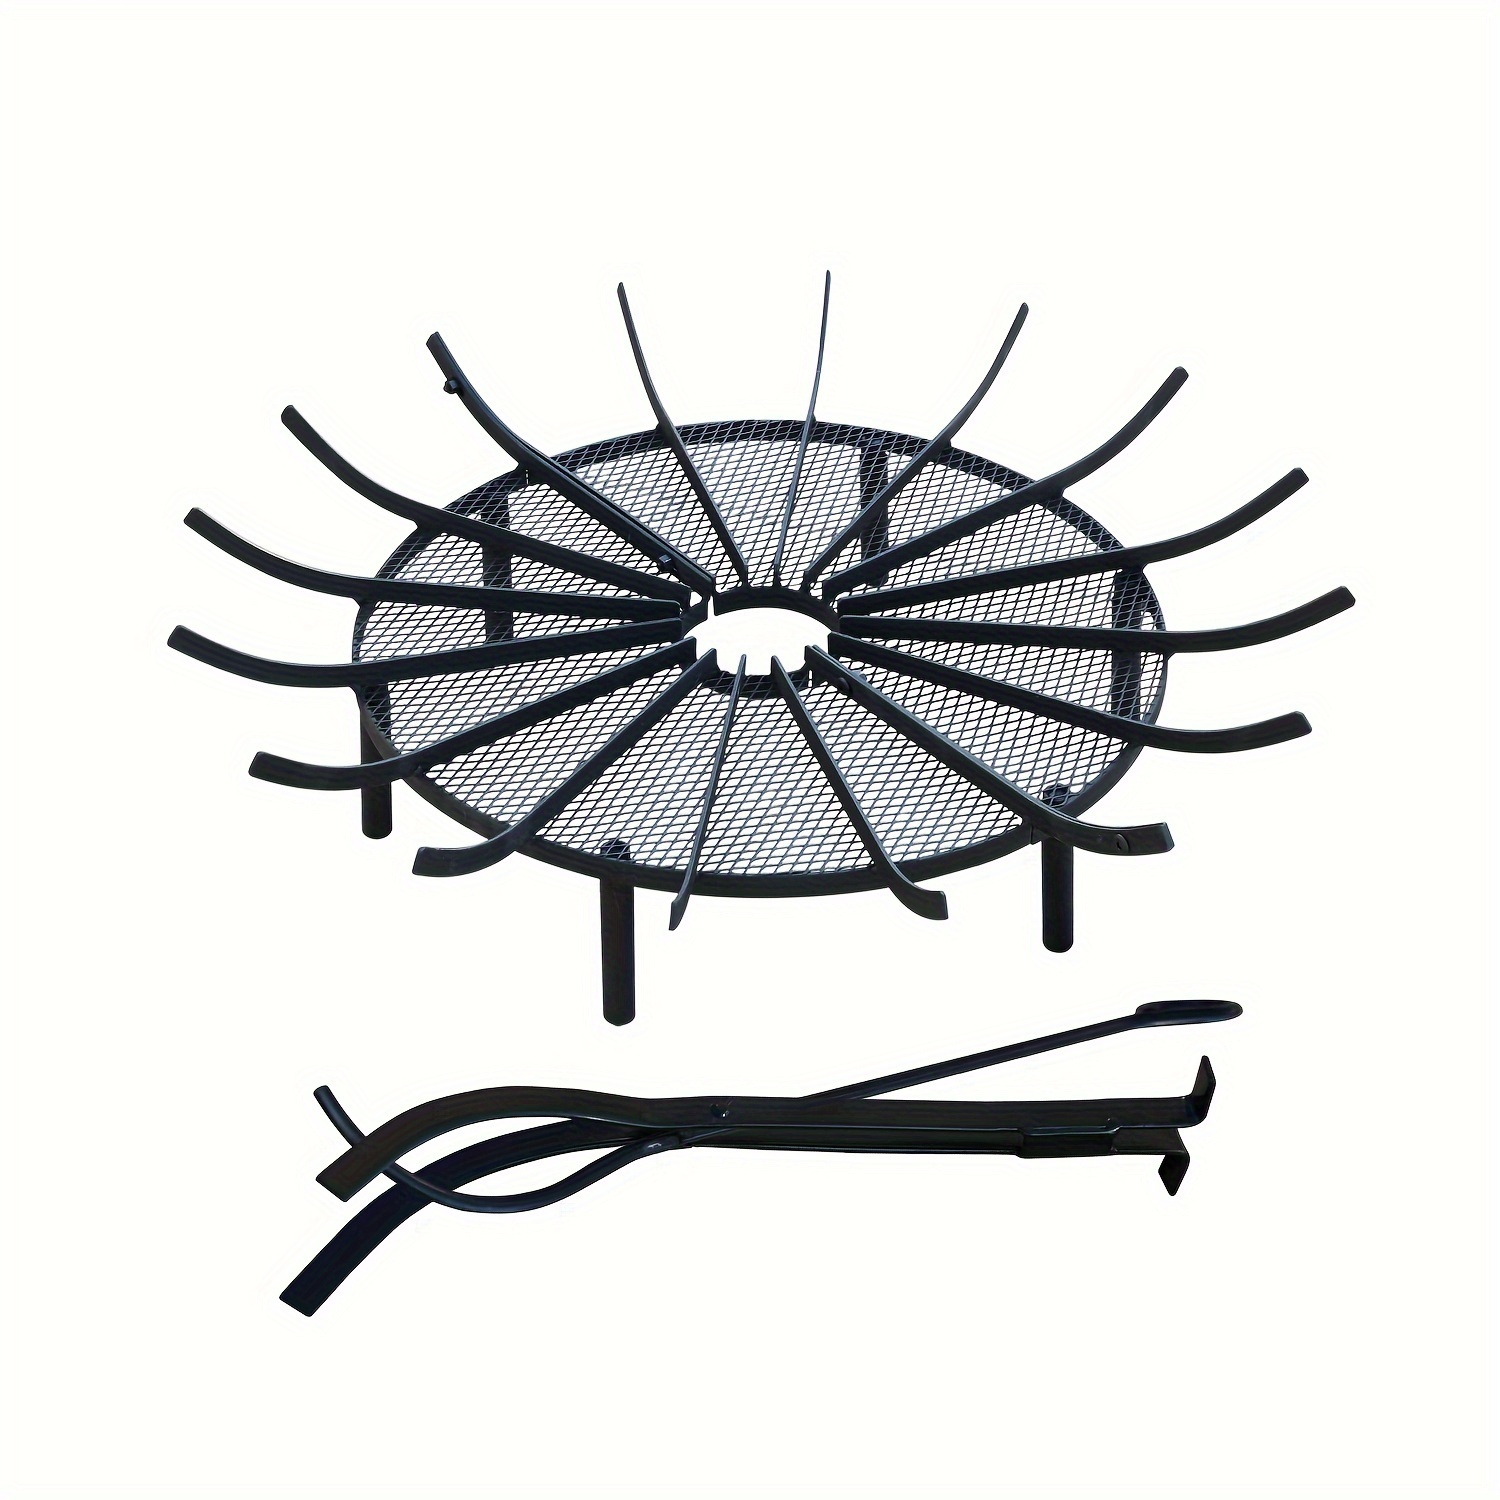 

28''/32''/36'' Round Spider Fire Pit Grate With Firewood Tongs For Outdoor Camping Fire Pit